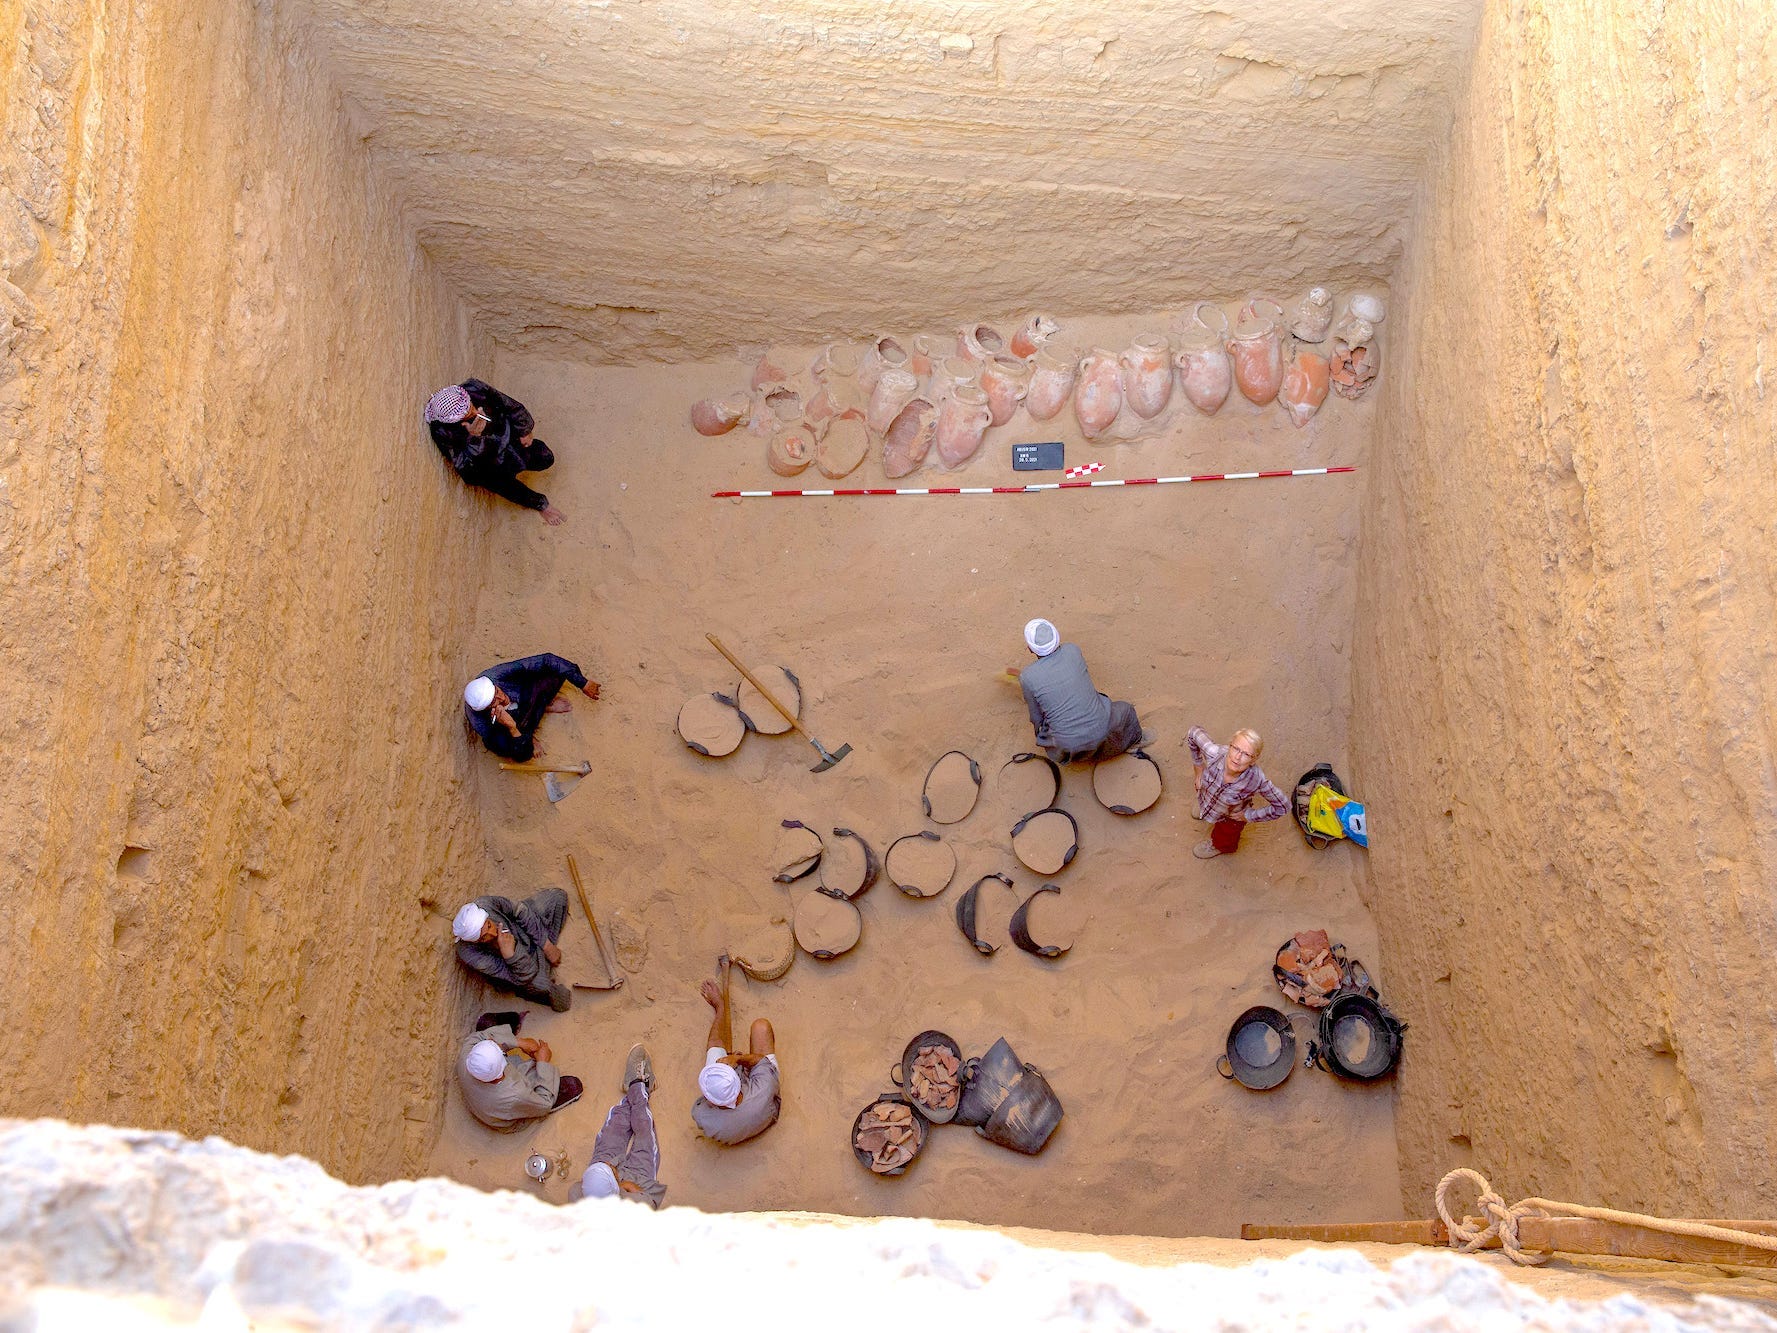 The embalming shaft is seen from the surface, with people excavating the site at the bottom of the shaft.